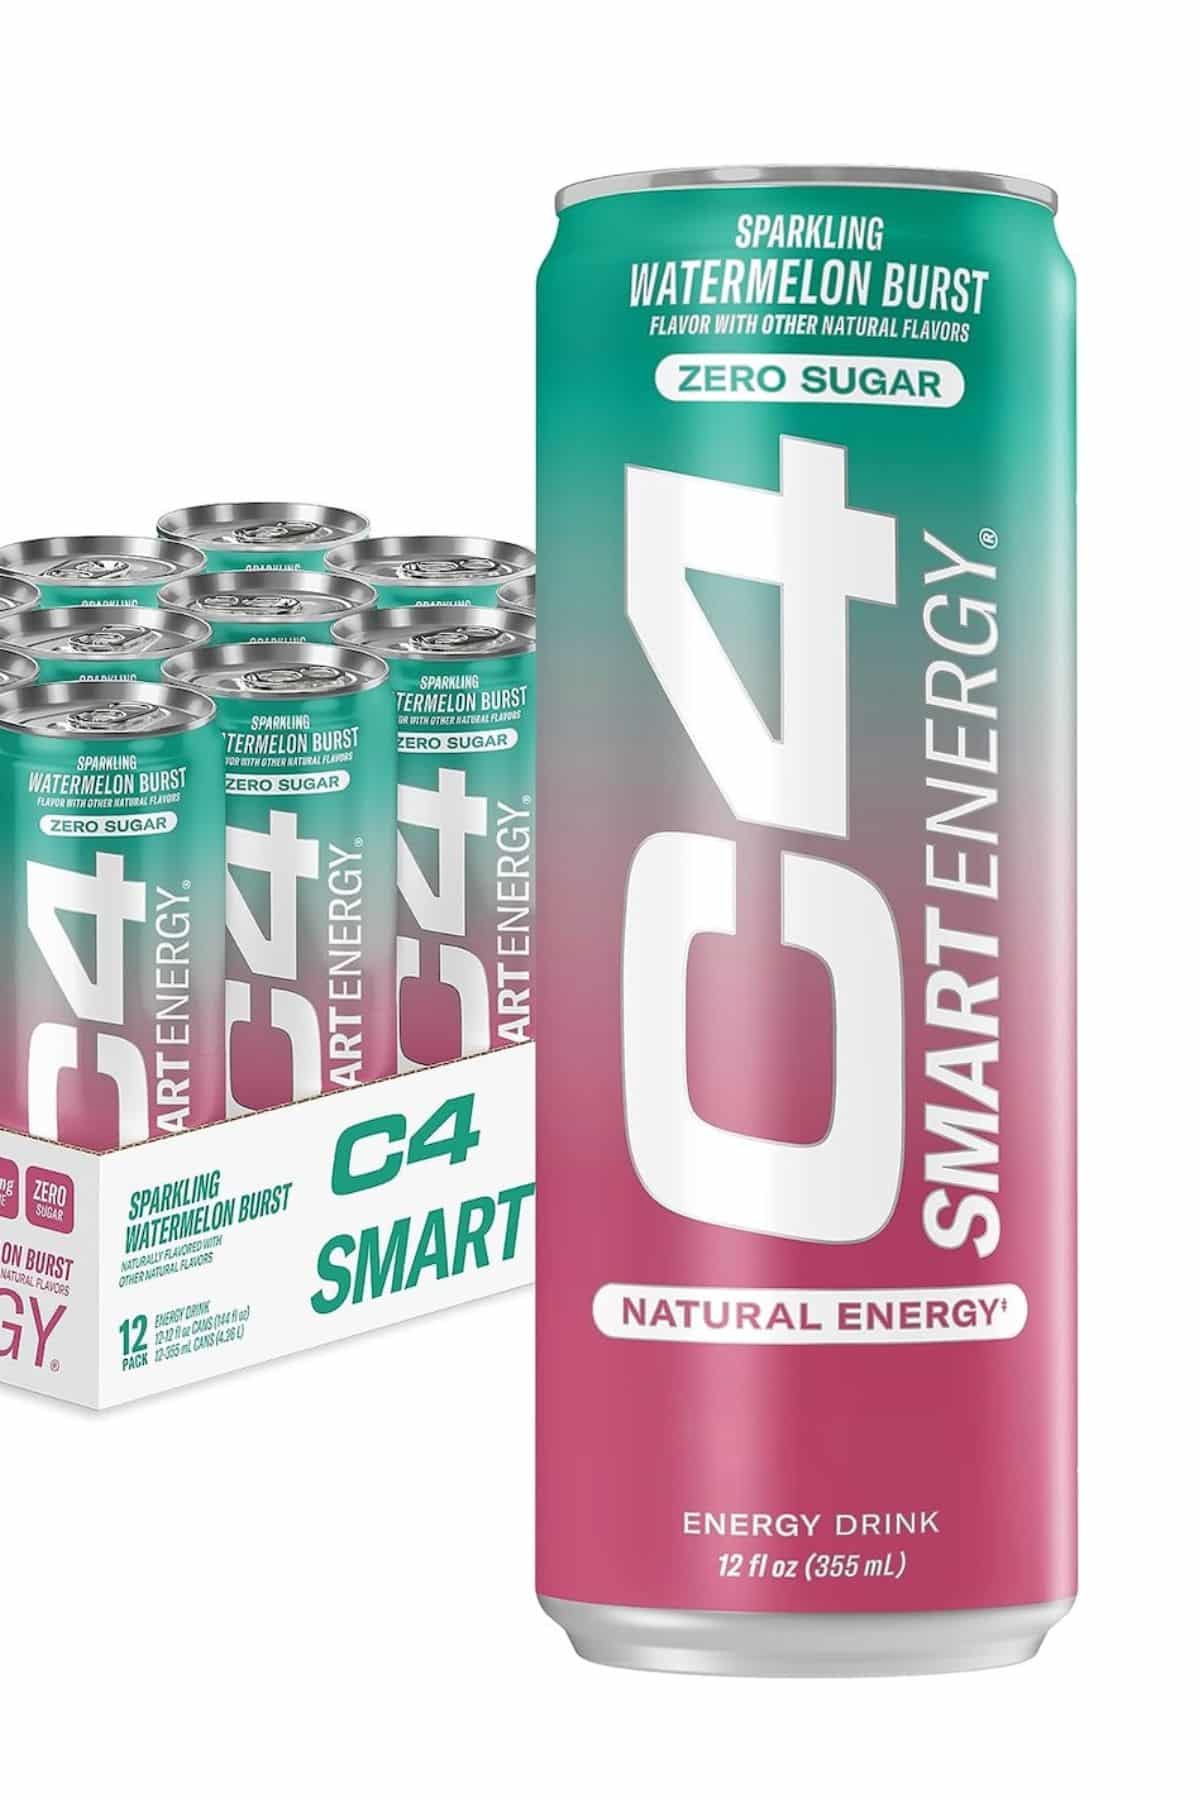 Is C4 Energy Drink Healthy (Nutrition Pros and Cons)? - Clean Eating Kitchen